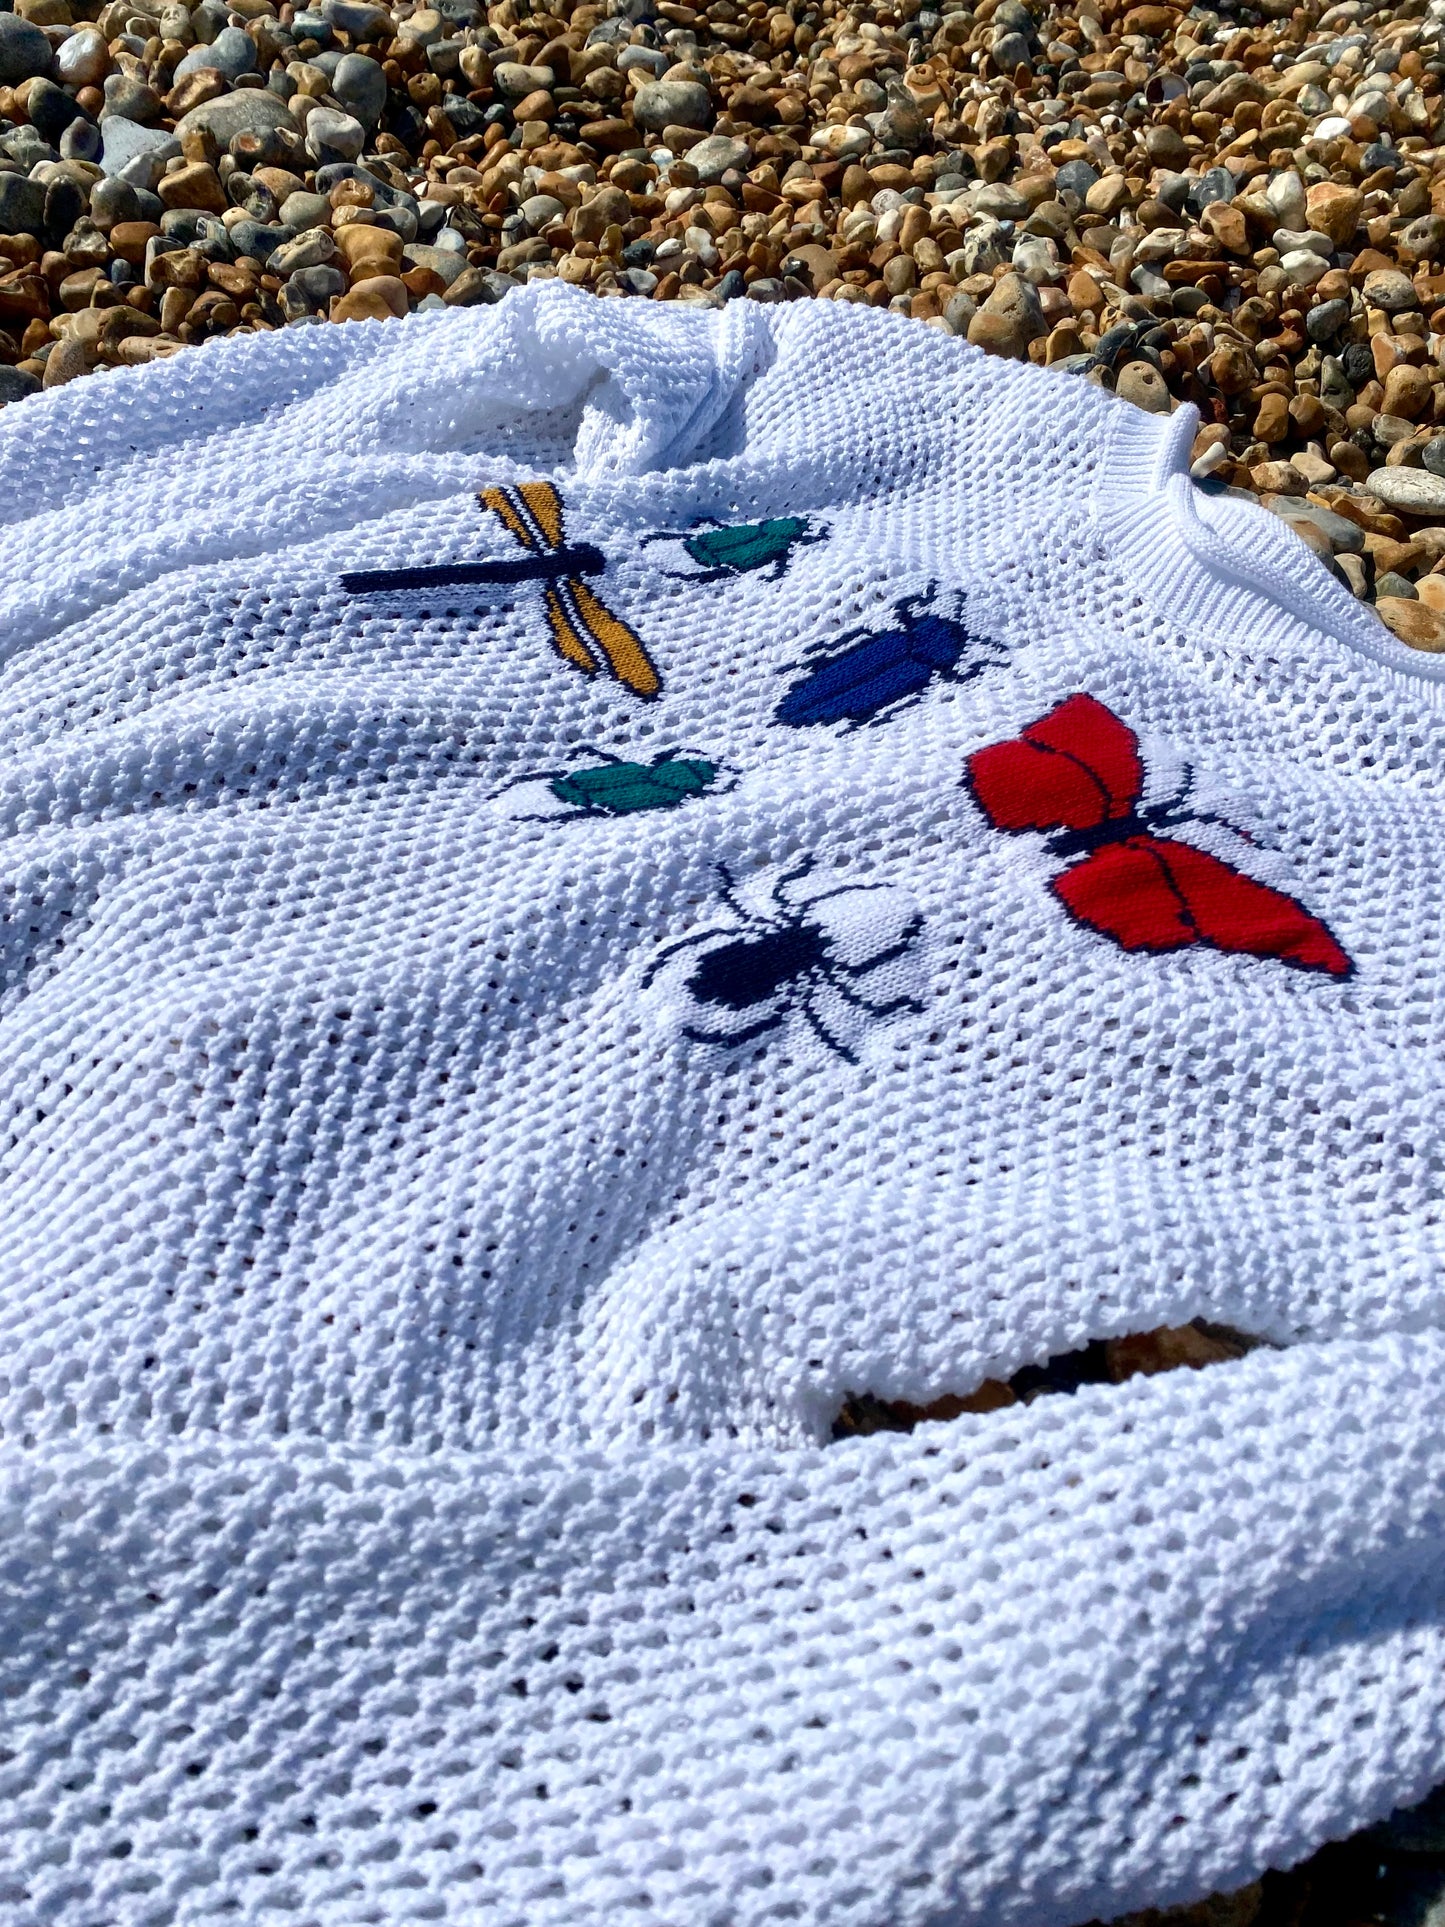 White Insect Jumper